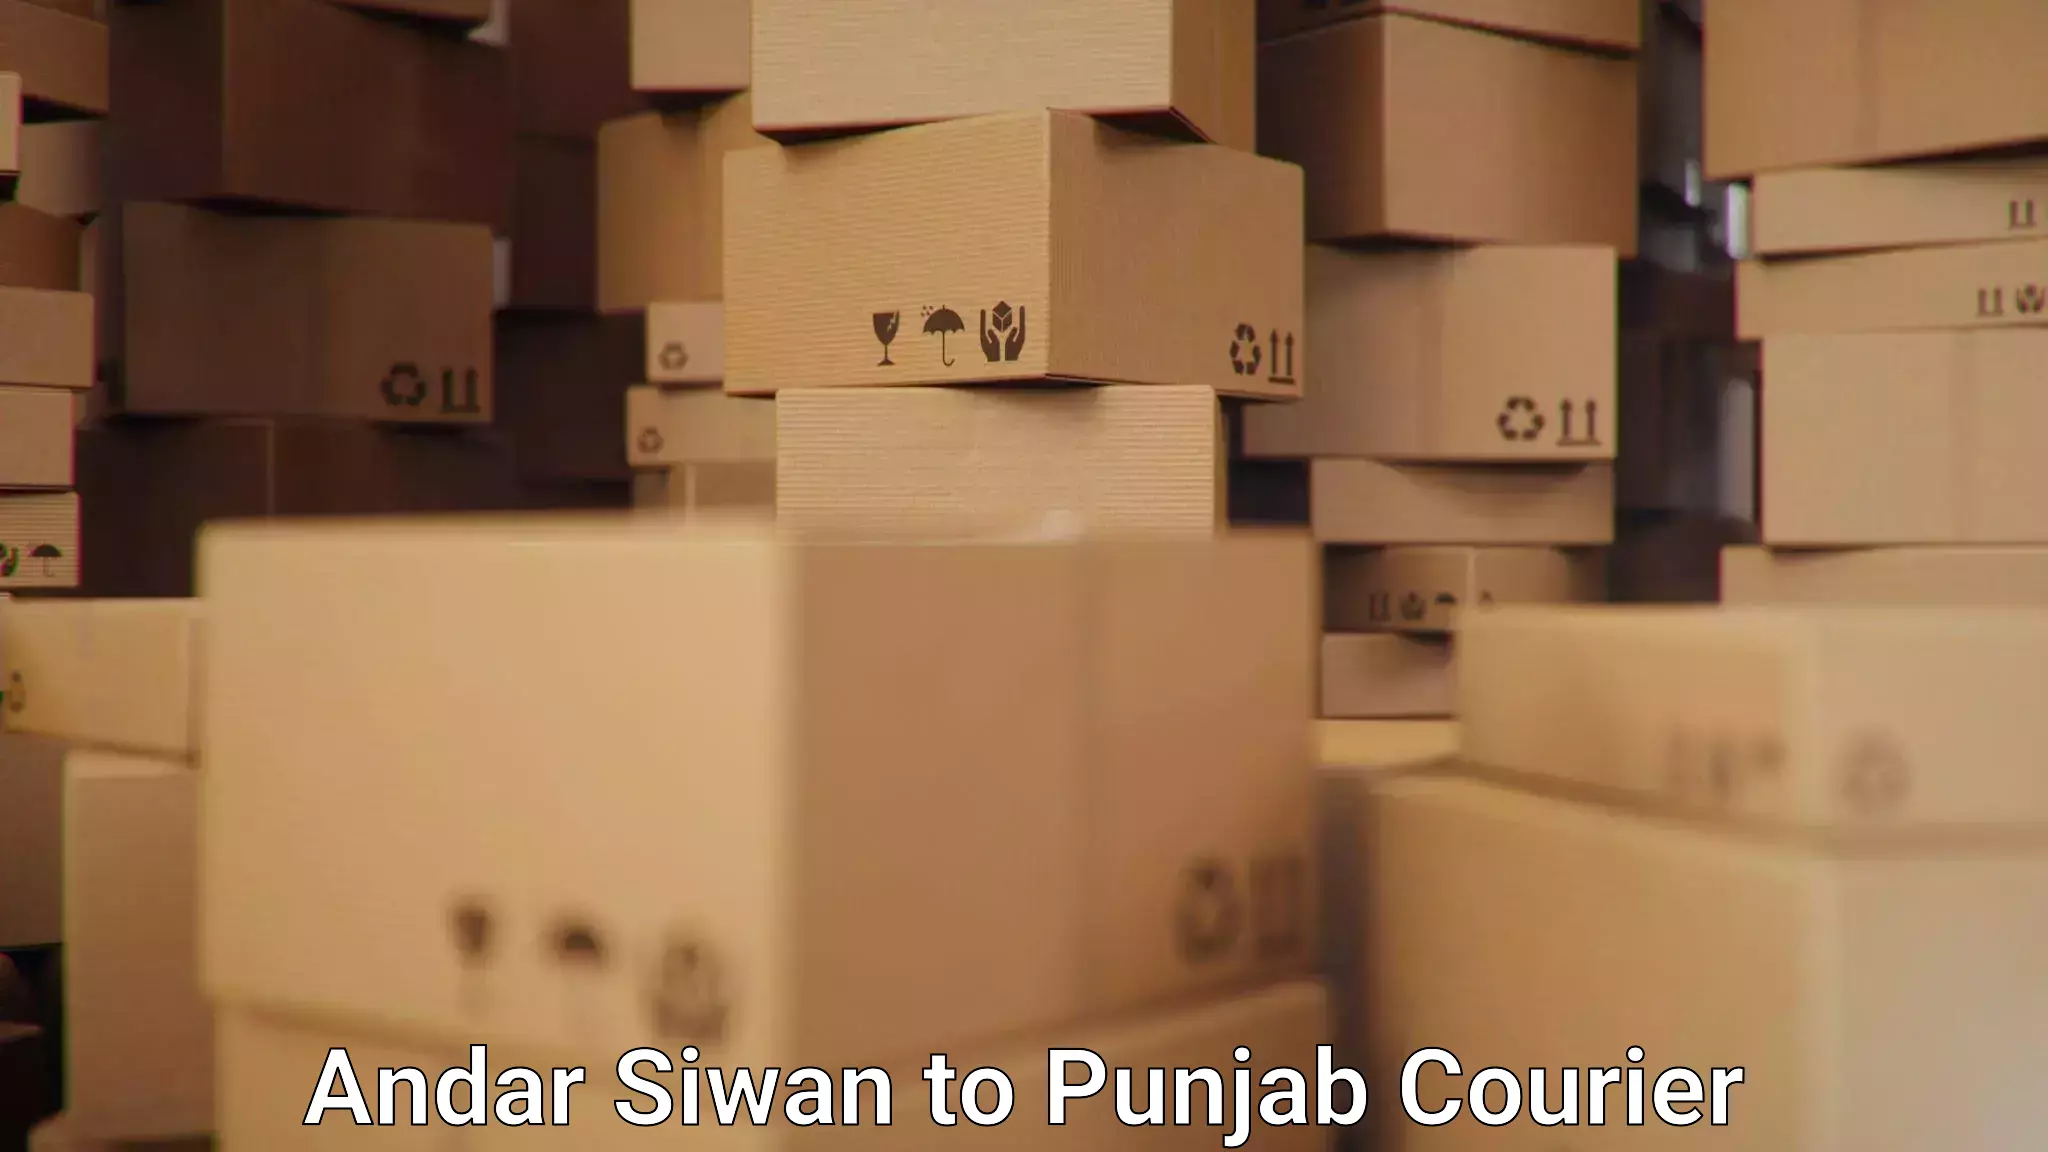 Efficient package consolidation Andar Siwan to Punjab